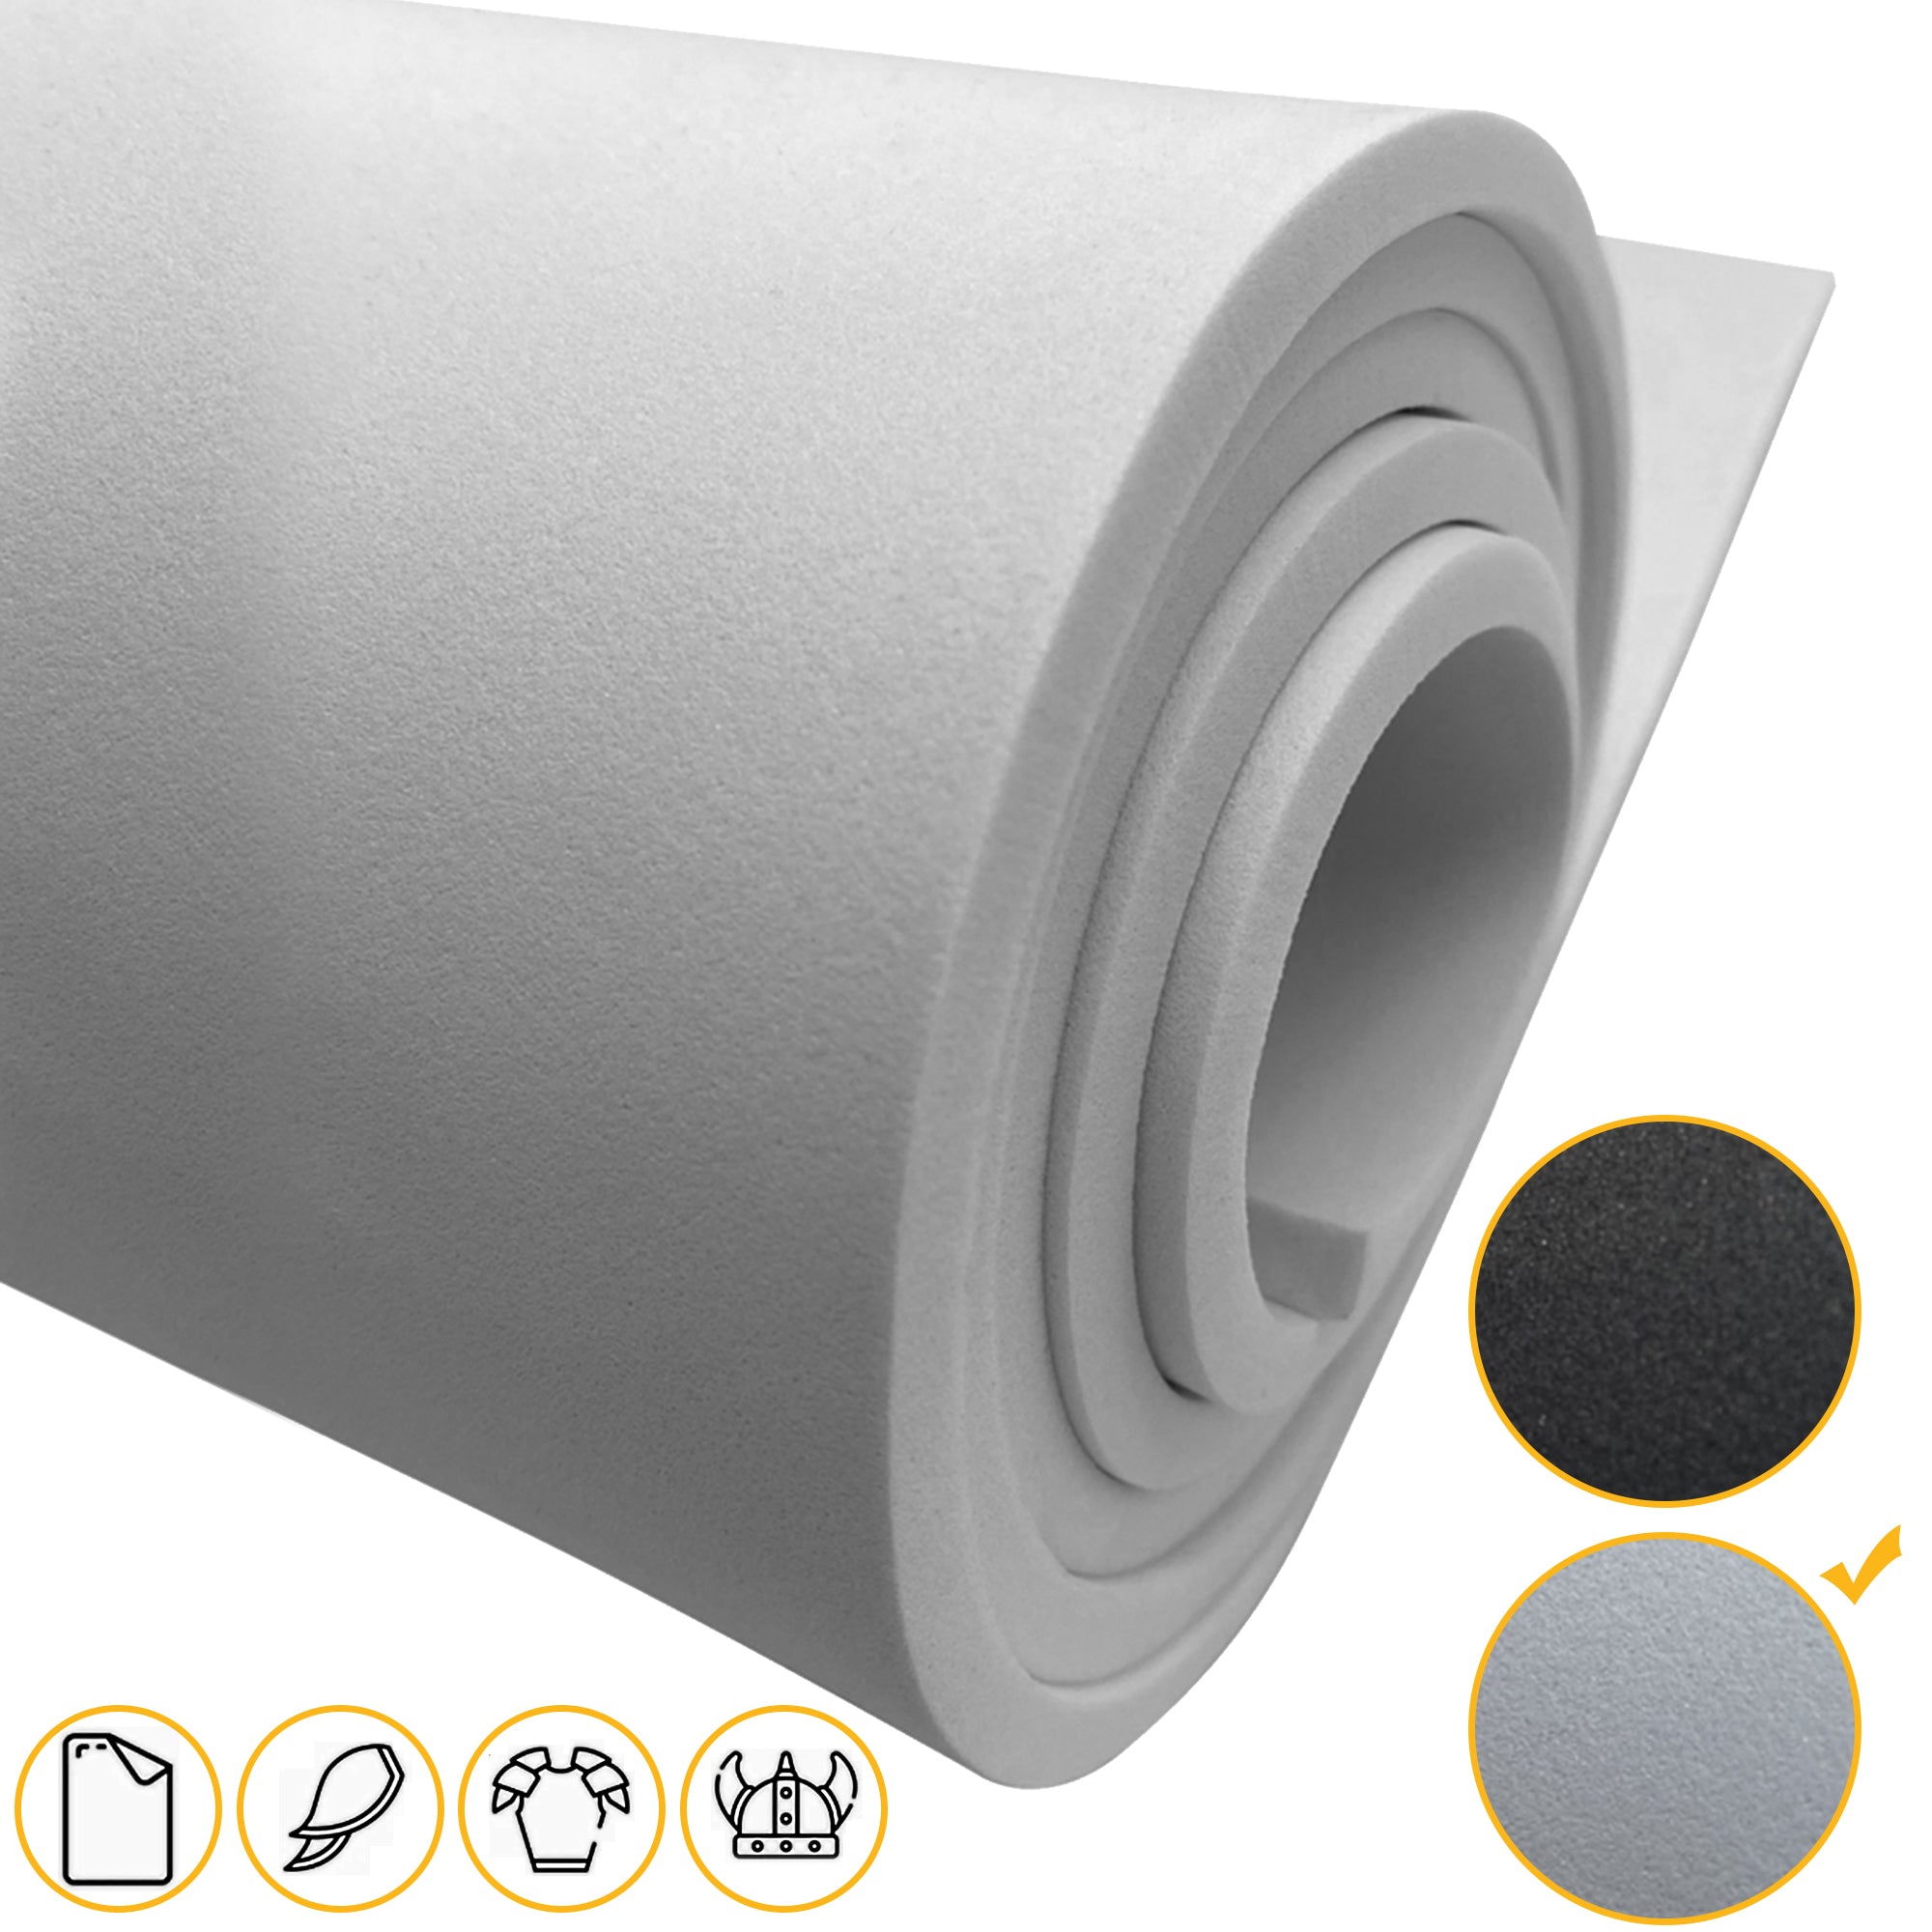 Wholesale Bulk 8mm craft foam Supplier At Low Prices 